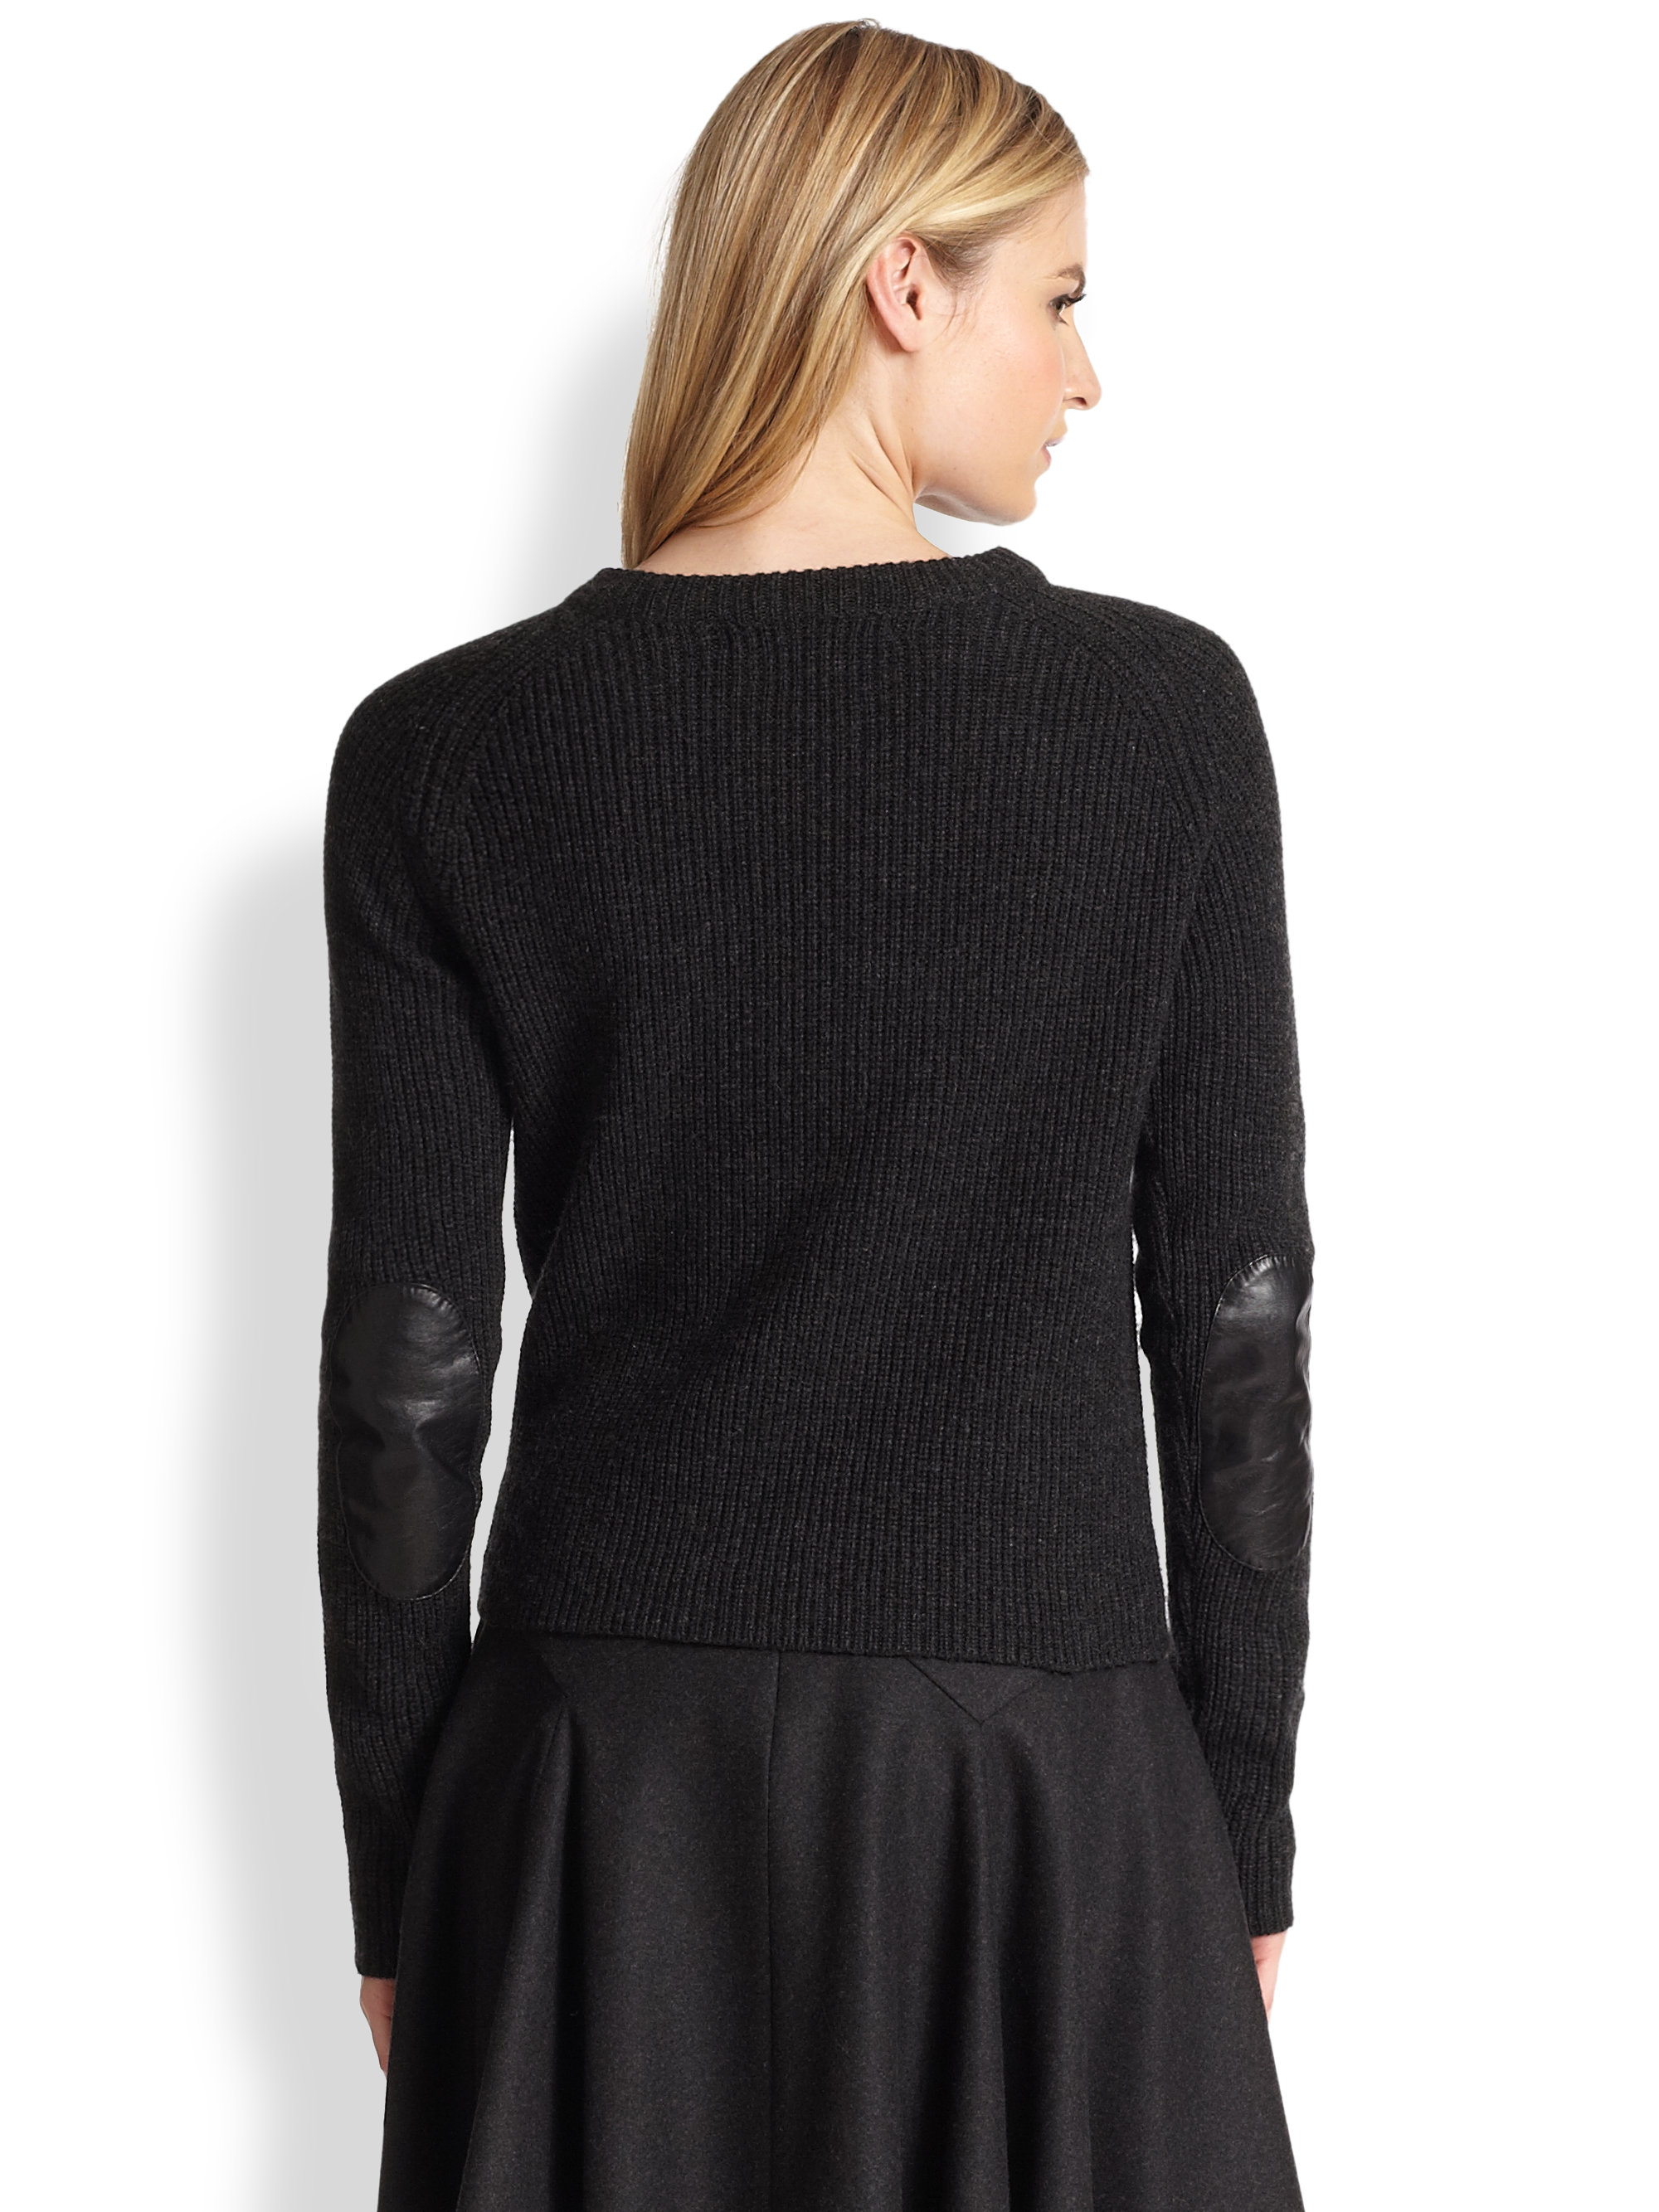 Zionsville black sweater with elbow patches, Summer outfit for wedding guest, louis vuitton lv t shirt. 